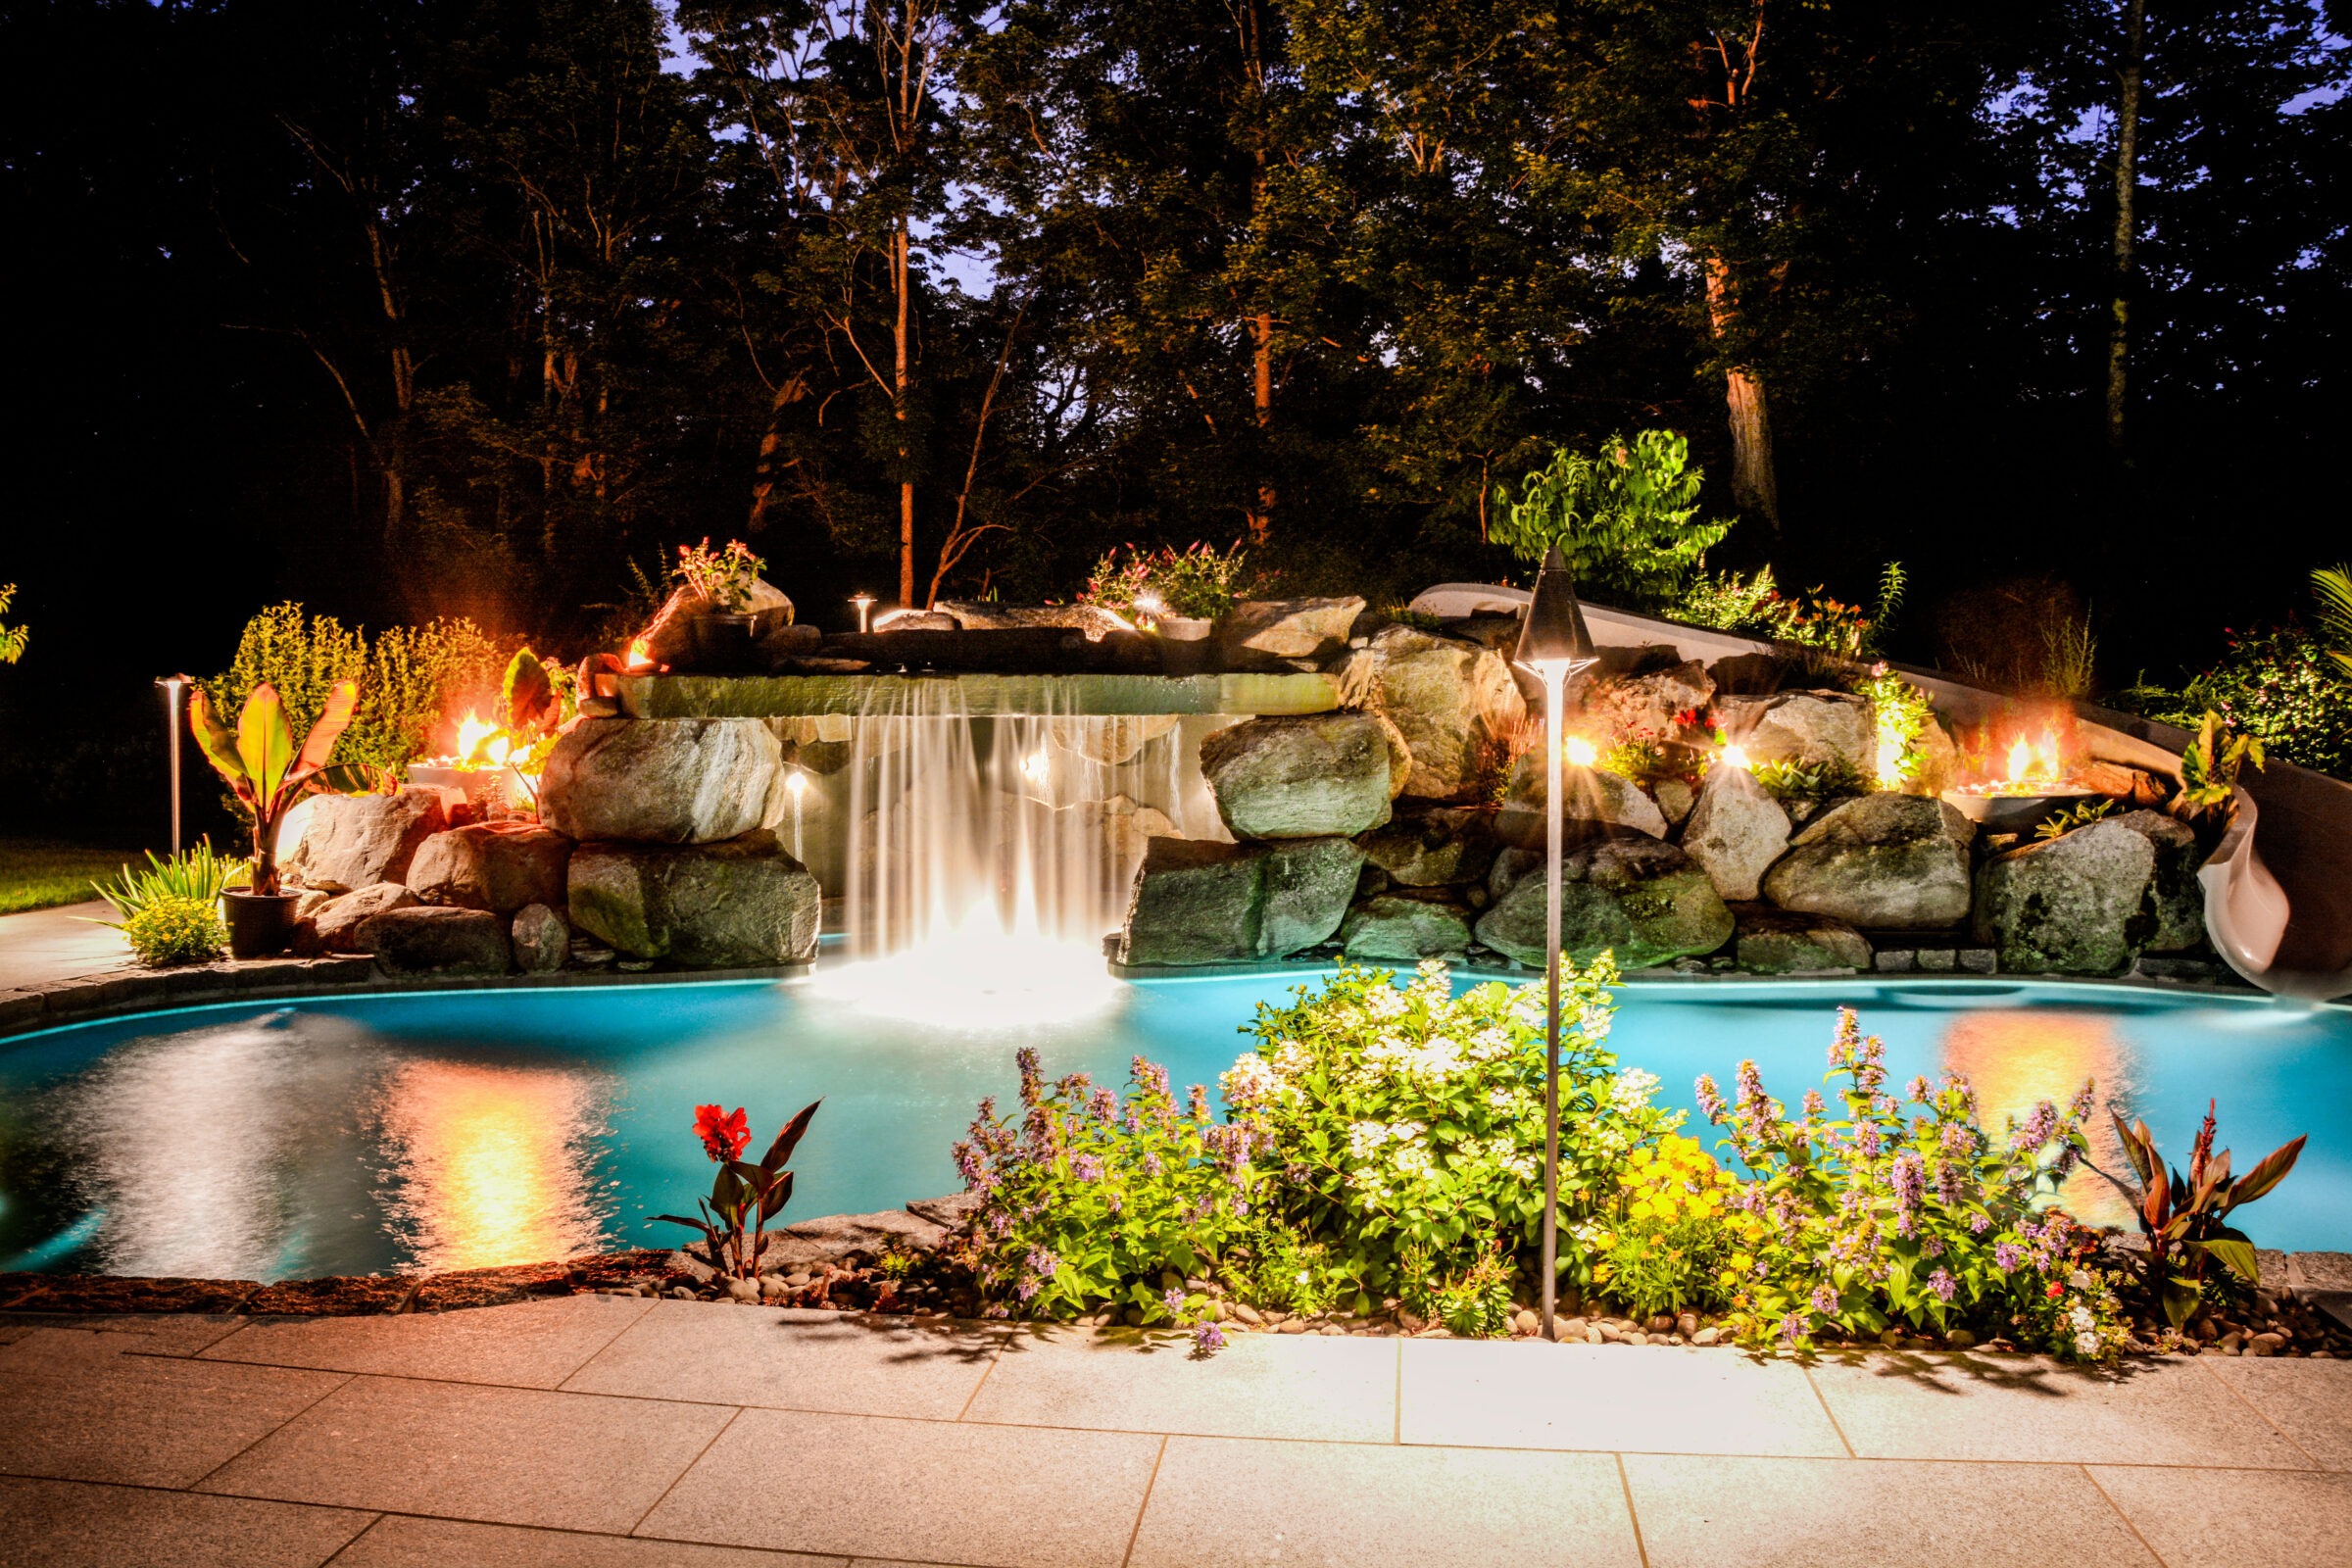 A luxuriously lit backyard pool at dusk, with a waterfall cascading over rocks, surrounded by lush plants, and tiki torches enhancing the ambience.